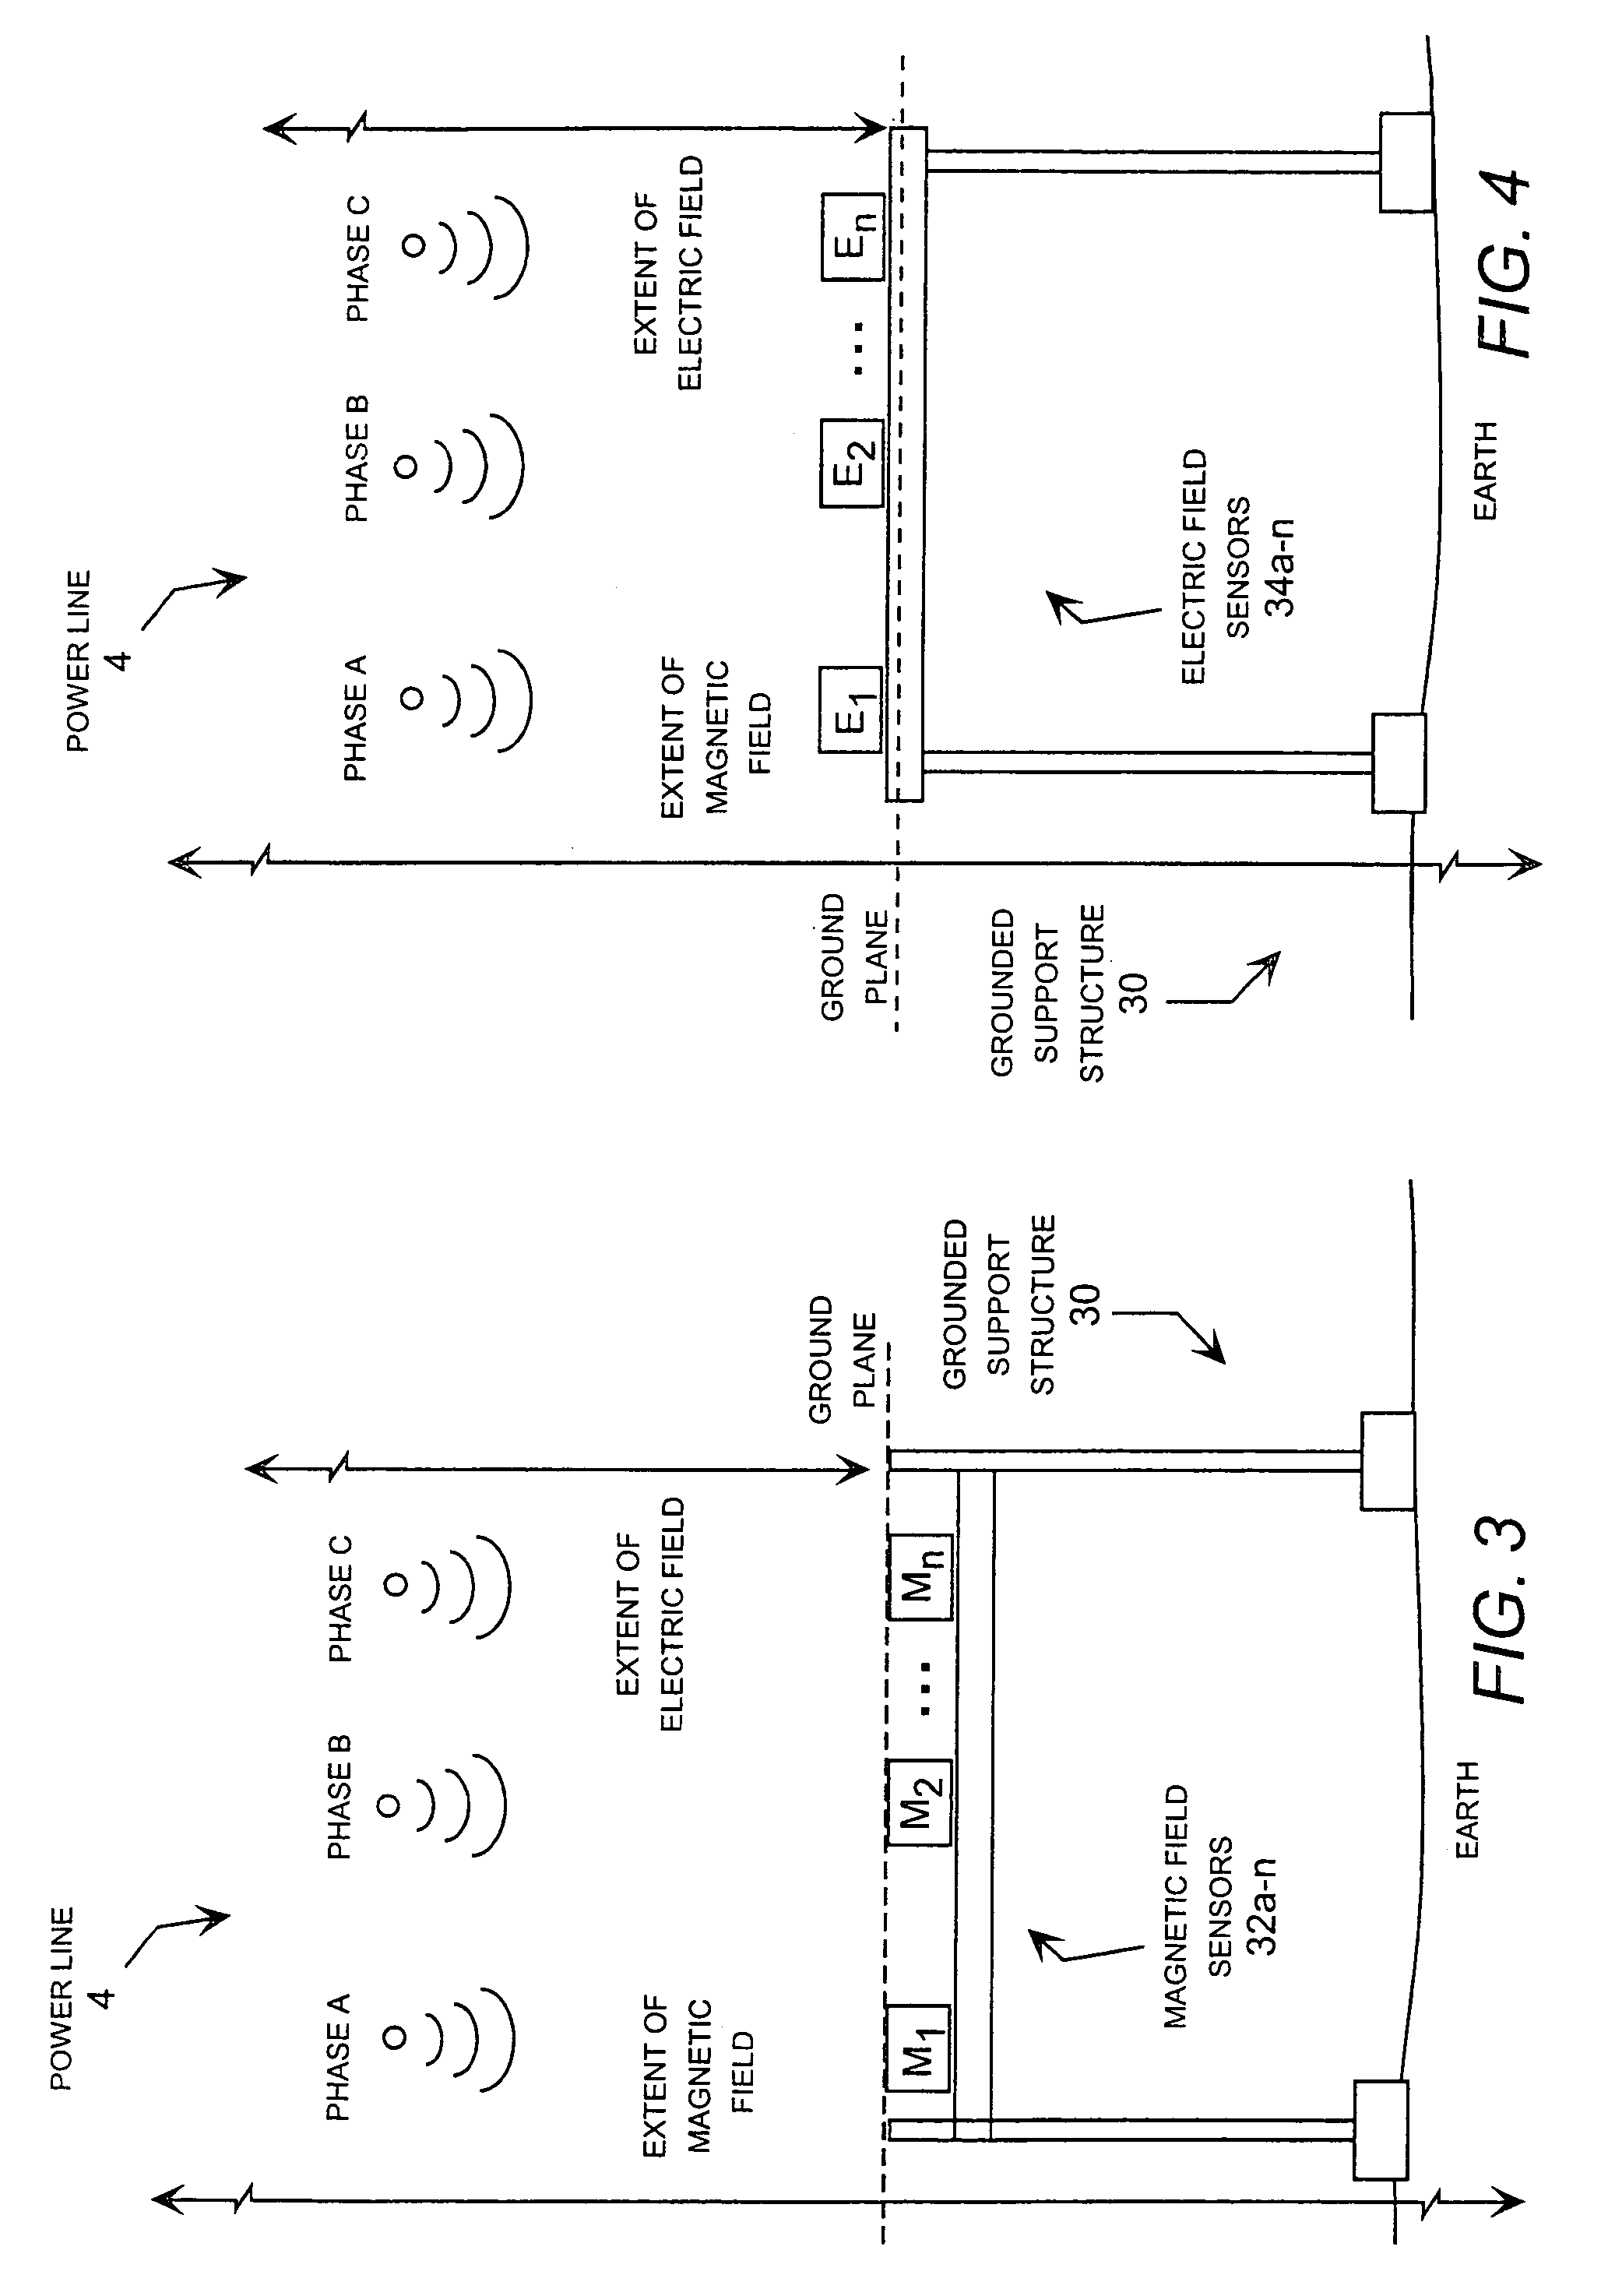 Electric power monitoring and response system